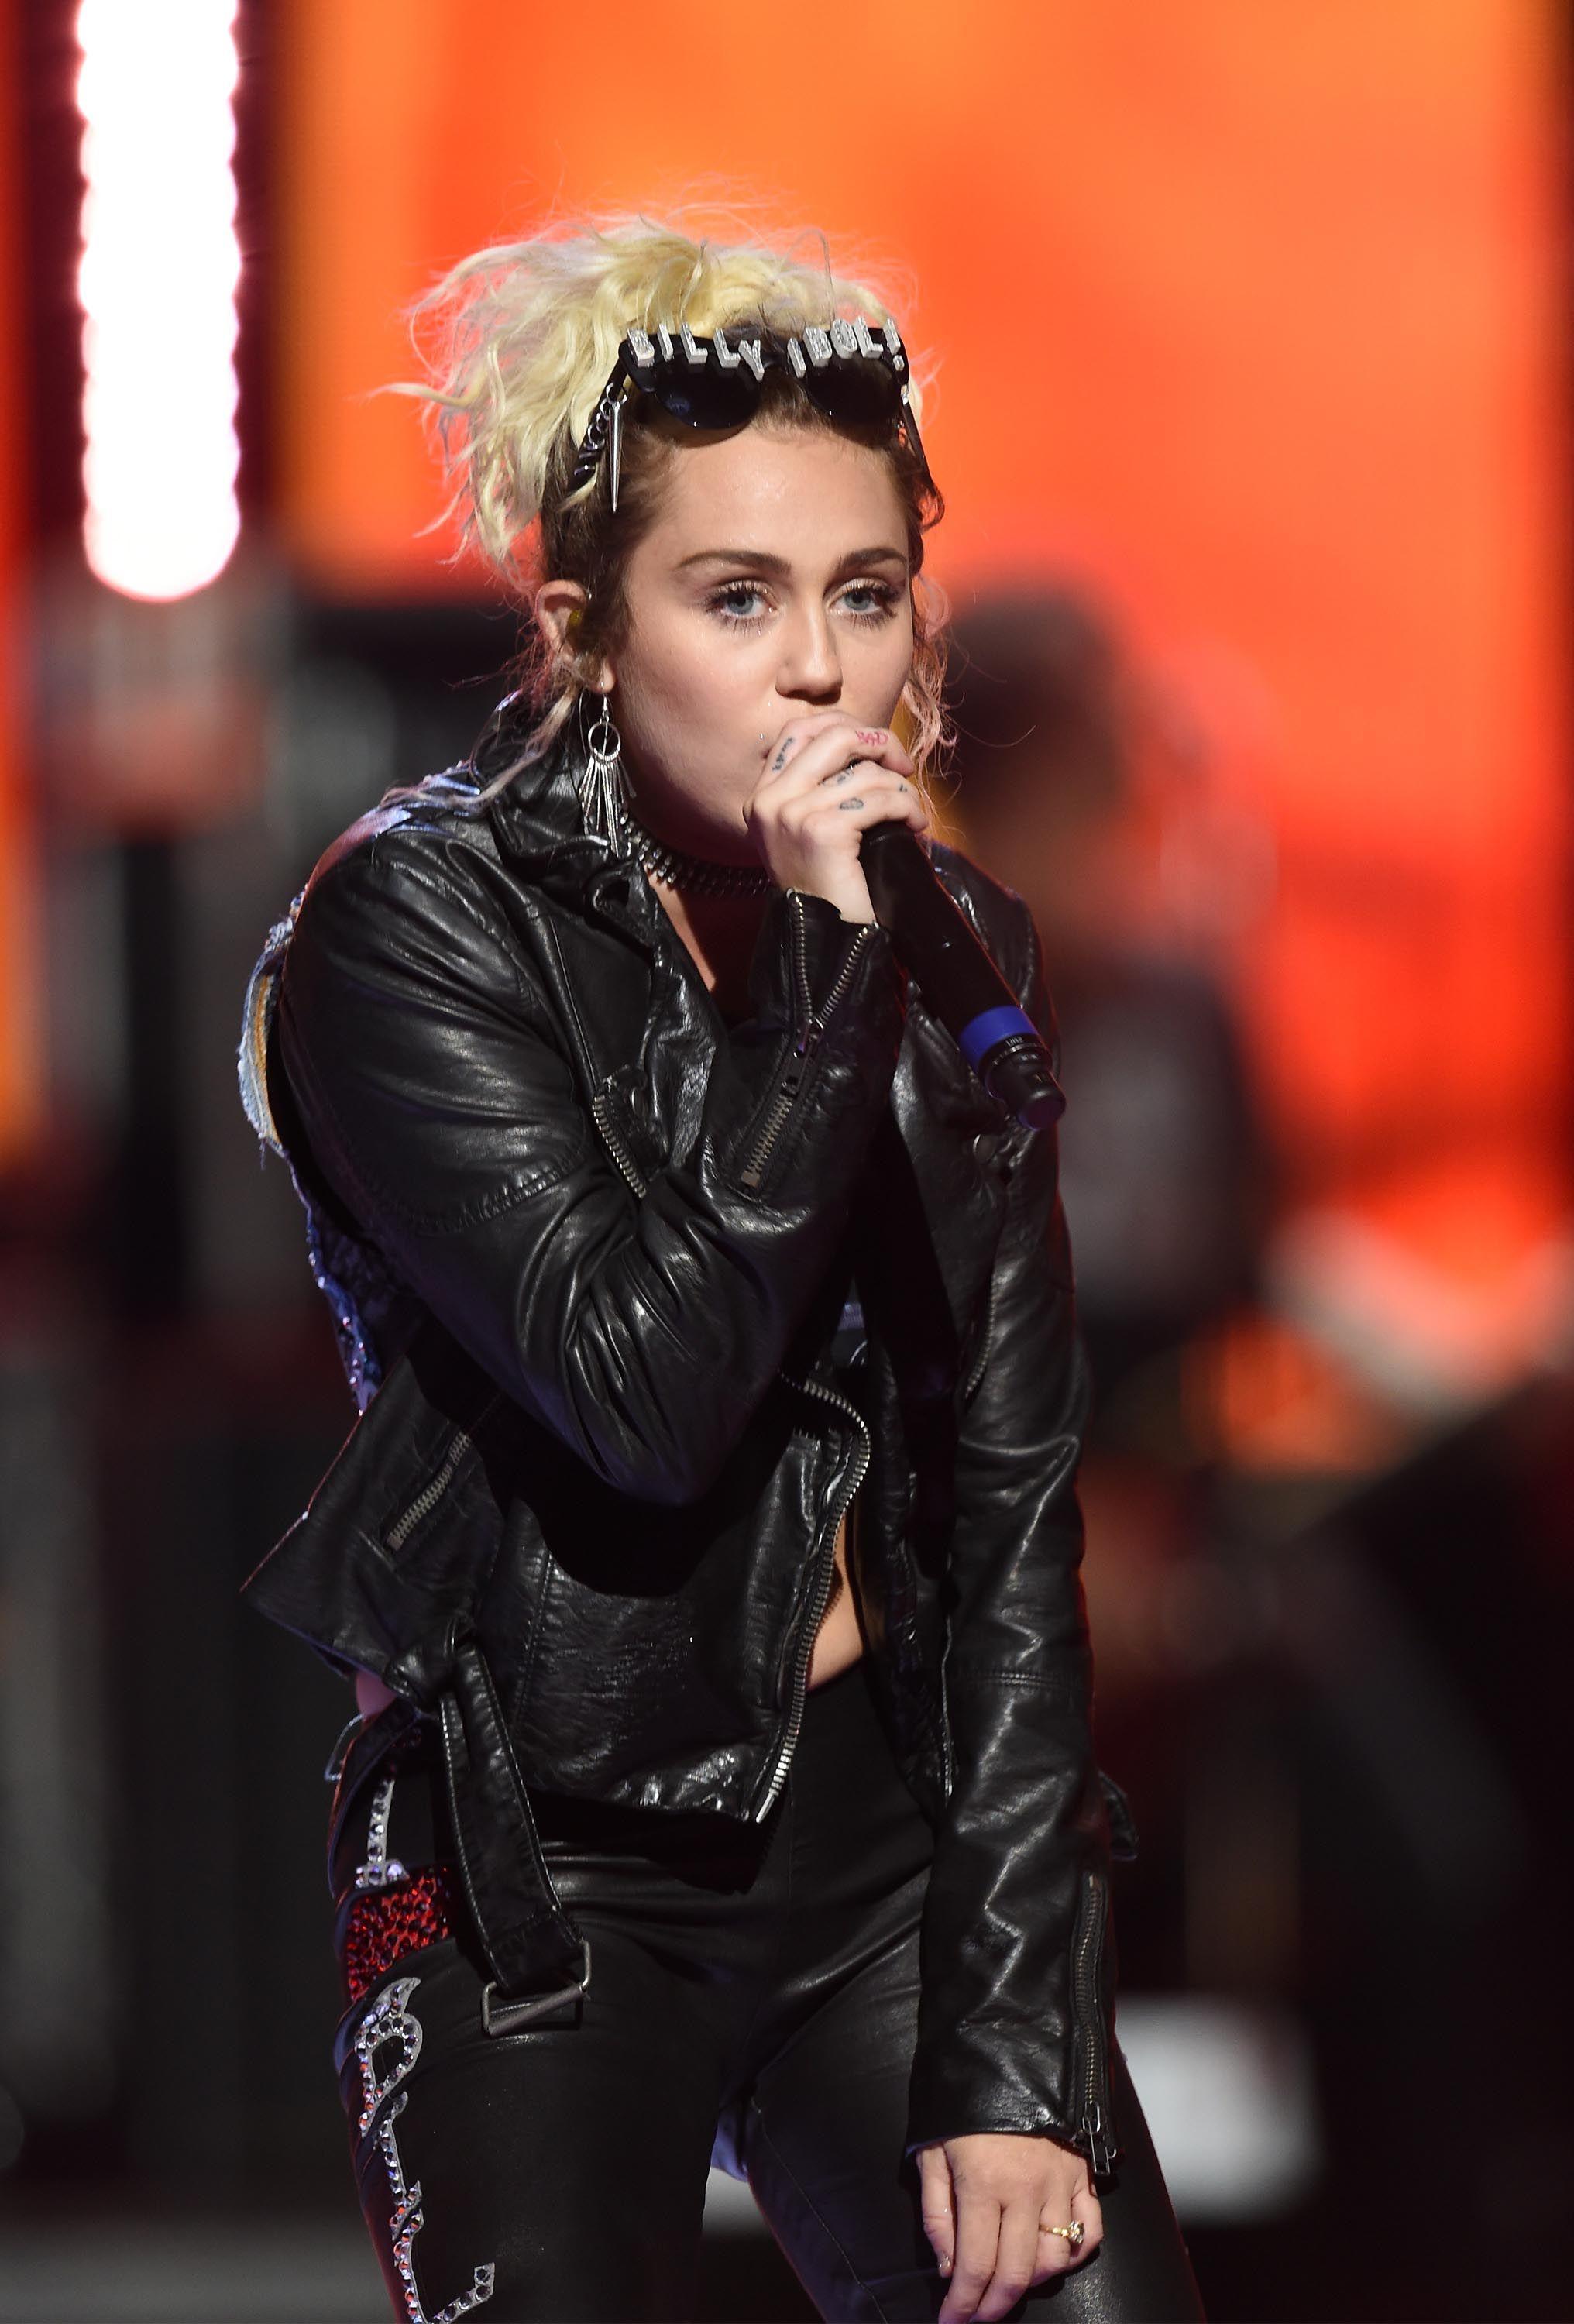 Miley & Billy Idol perform at the iHeartRadio Music Festival